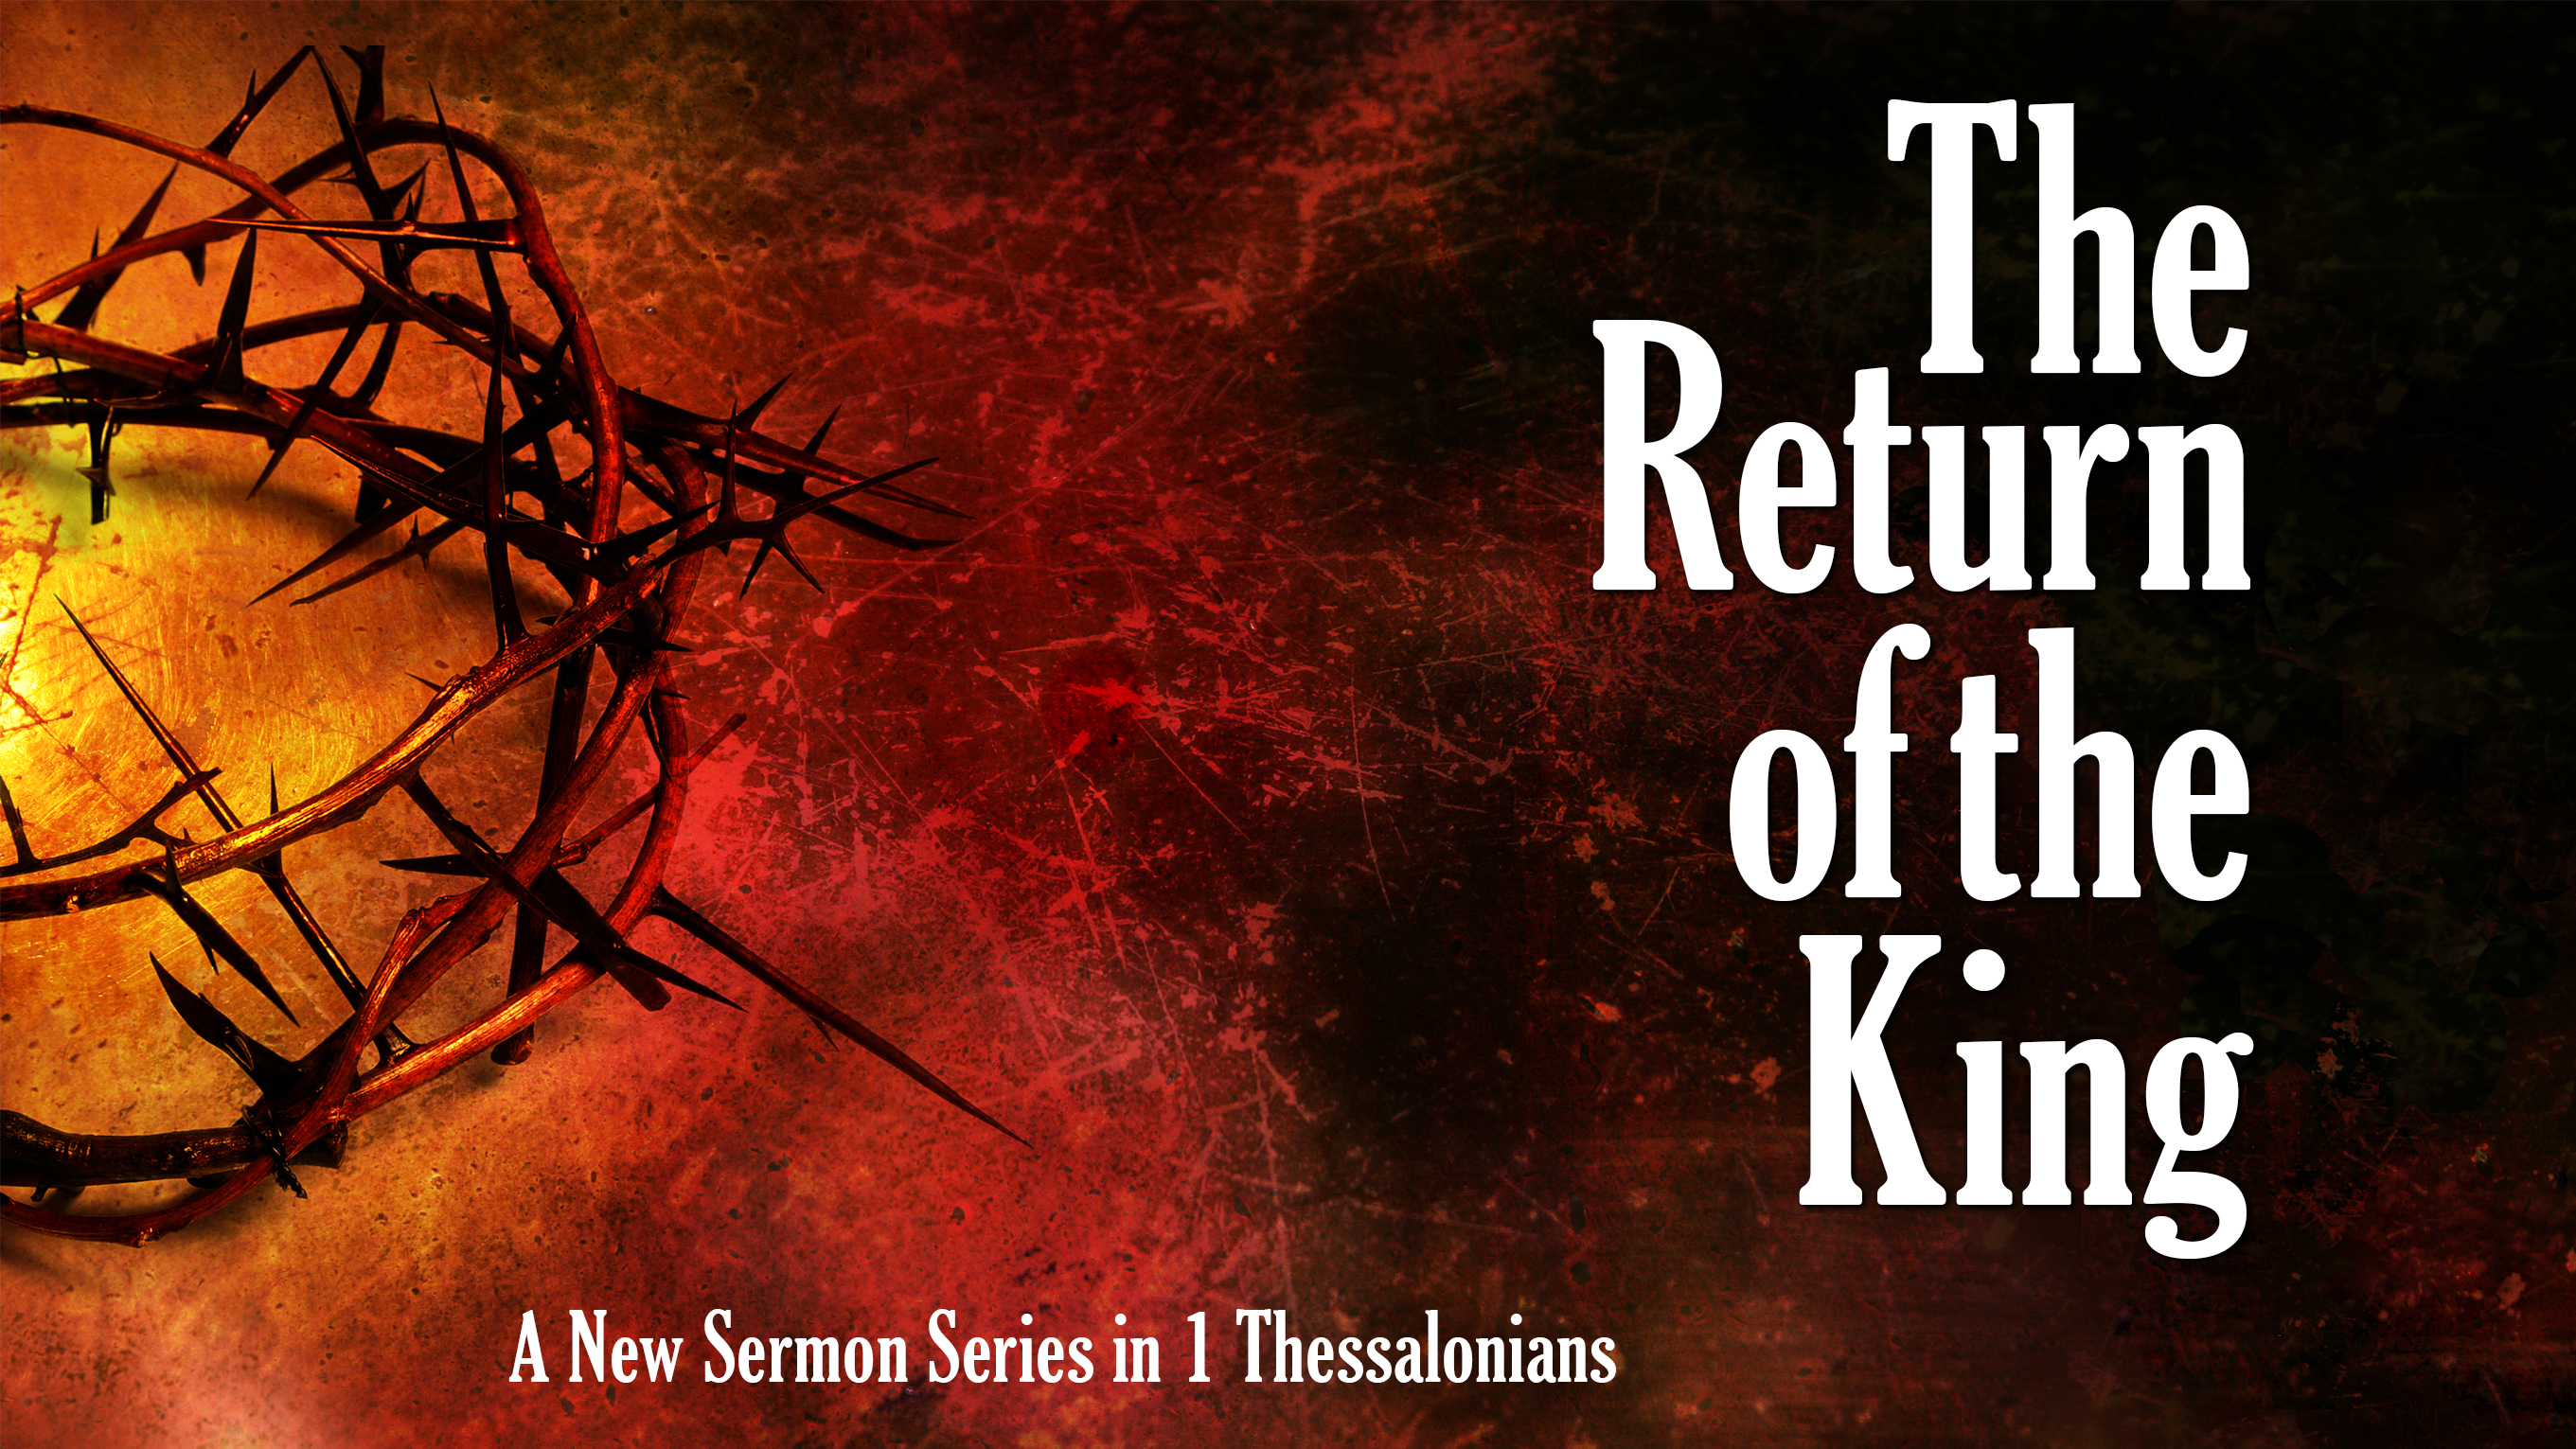 1 Thessalonians - The Return of the King